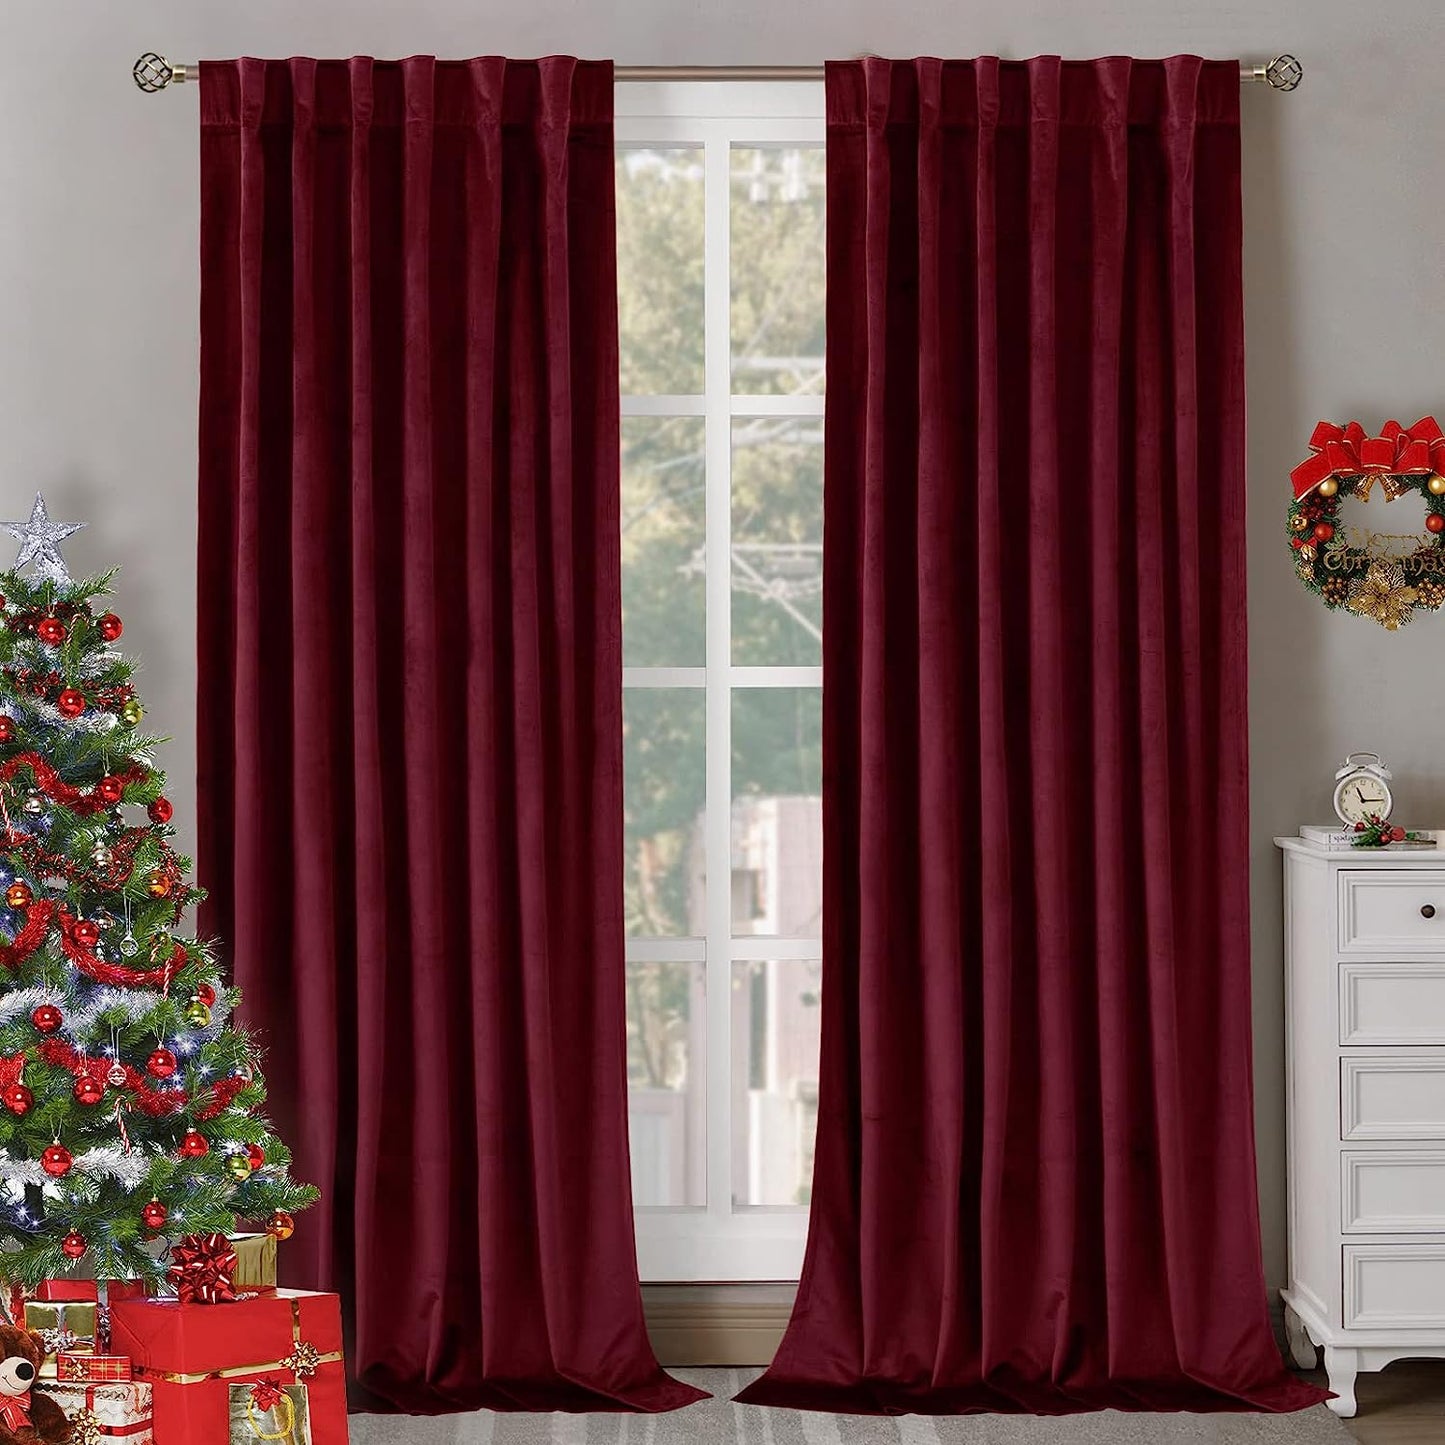 Bgment Grey Velvet Curtains 108 Inches Long for Living Room, Thermal Insulated Room Darkening Curtains Drapes Window Treatment with Back Tab and Rod Pocket, Set of 2 Panels, 52 X 108 Inch  BGment Red 52W X 108L 